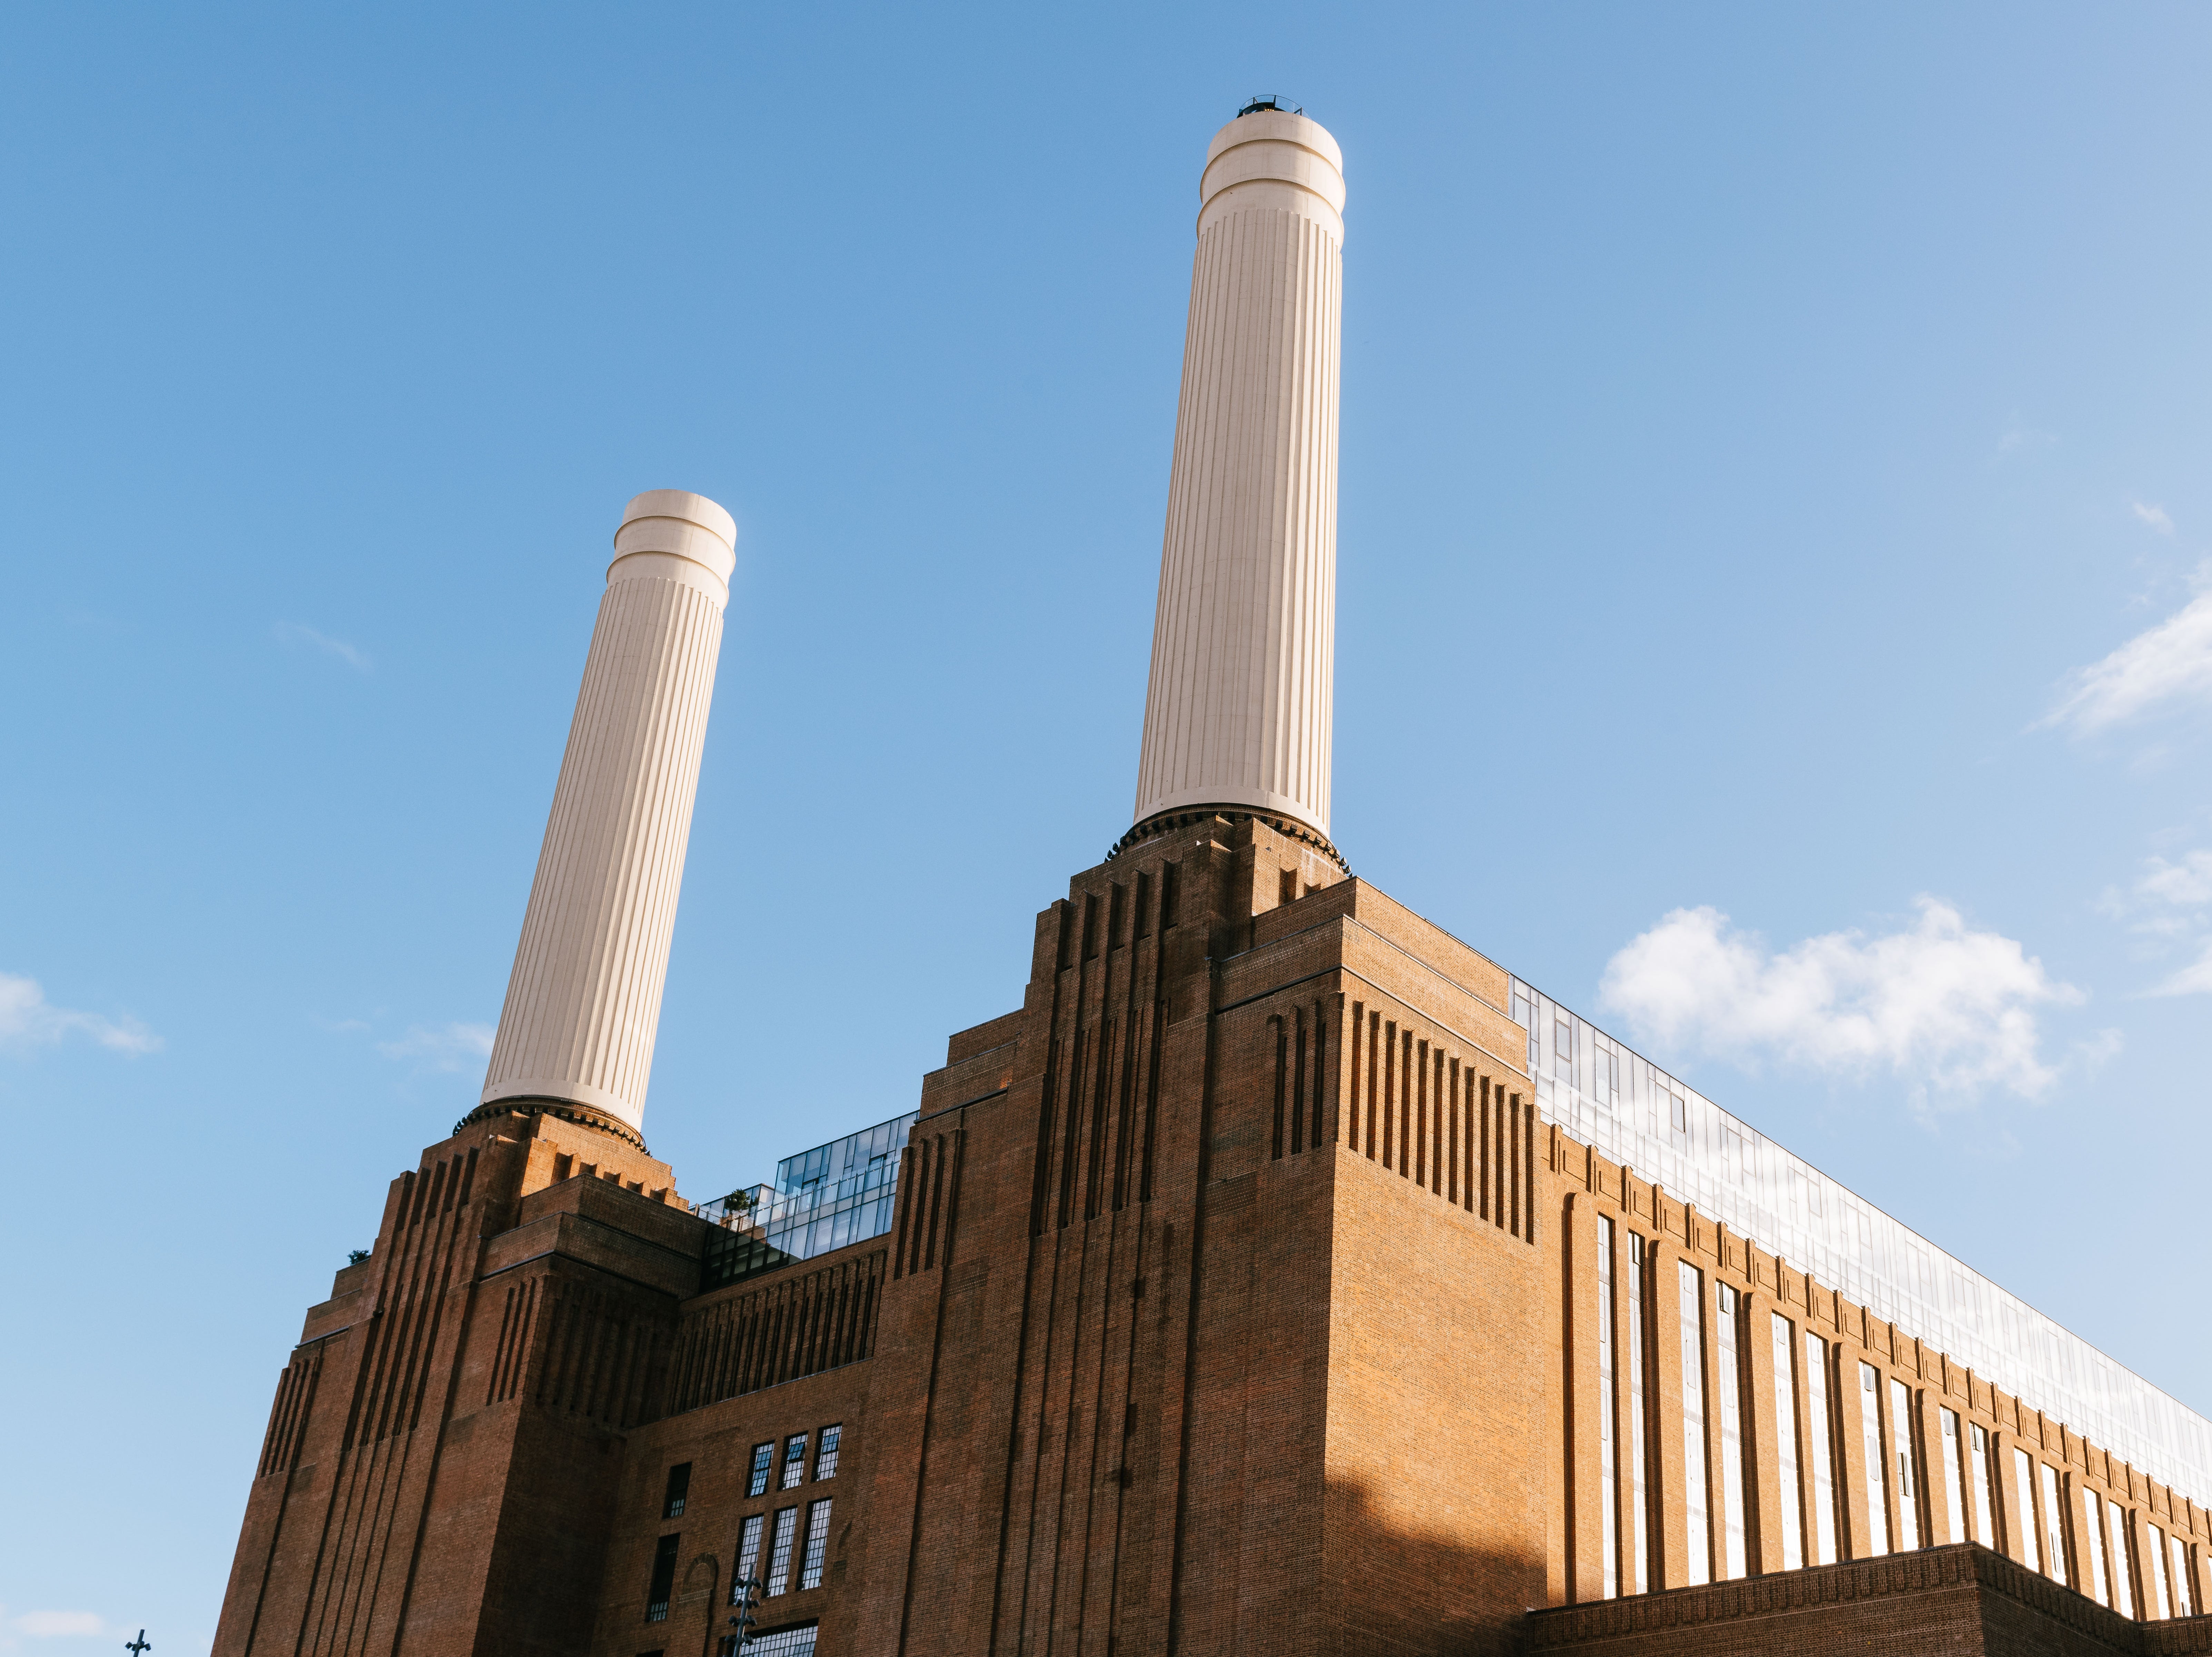 Battersea Power Station has a new attraction